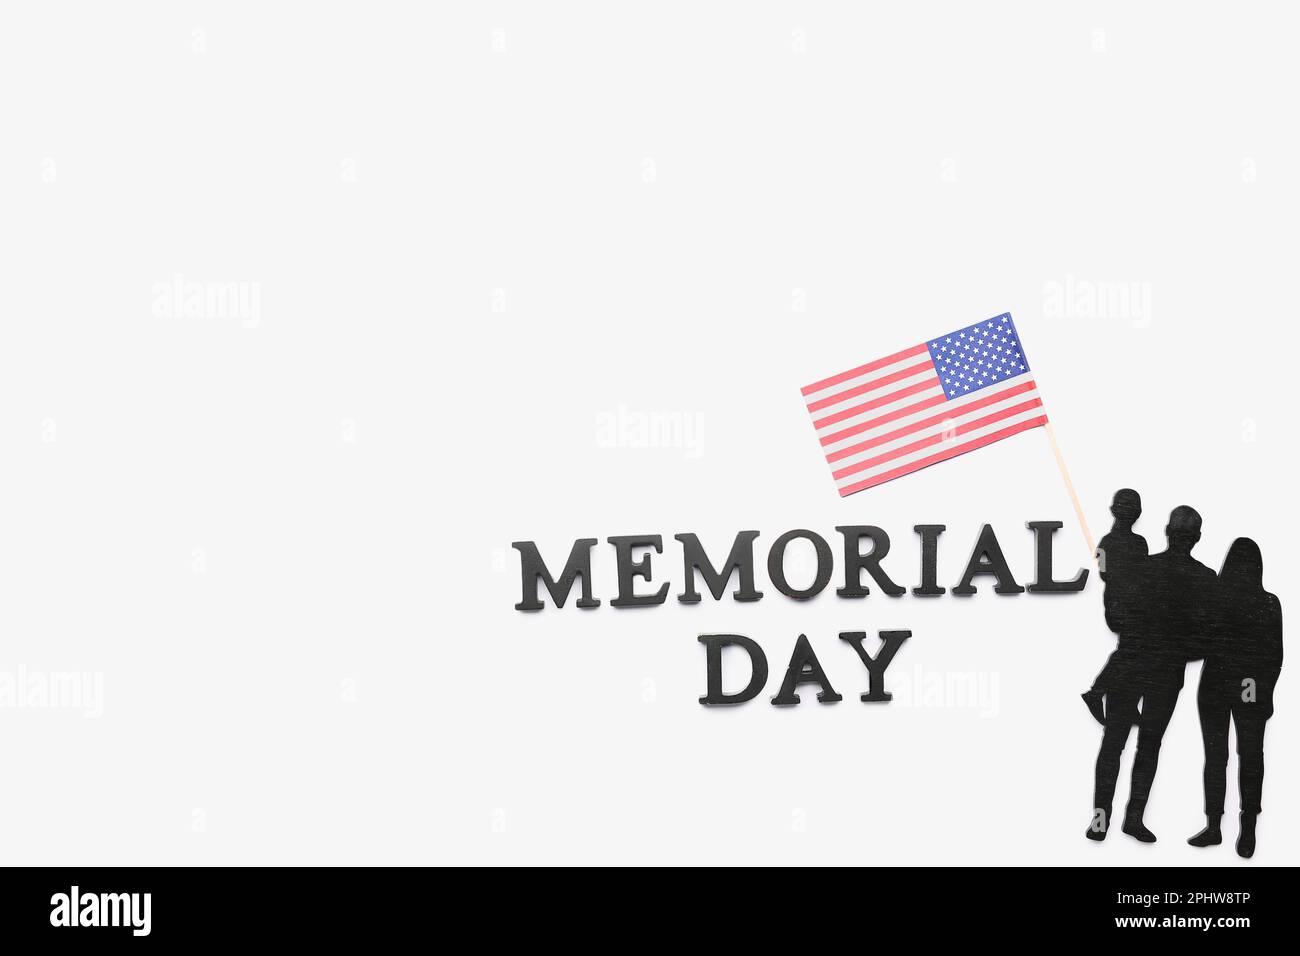 Text MEMORIAL DAY with family figure and USA flag on white background Stock Photo